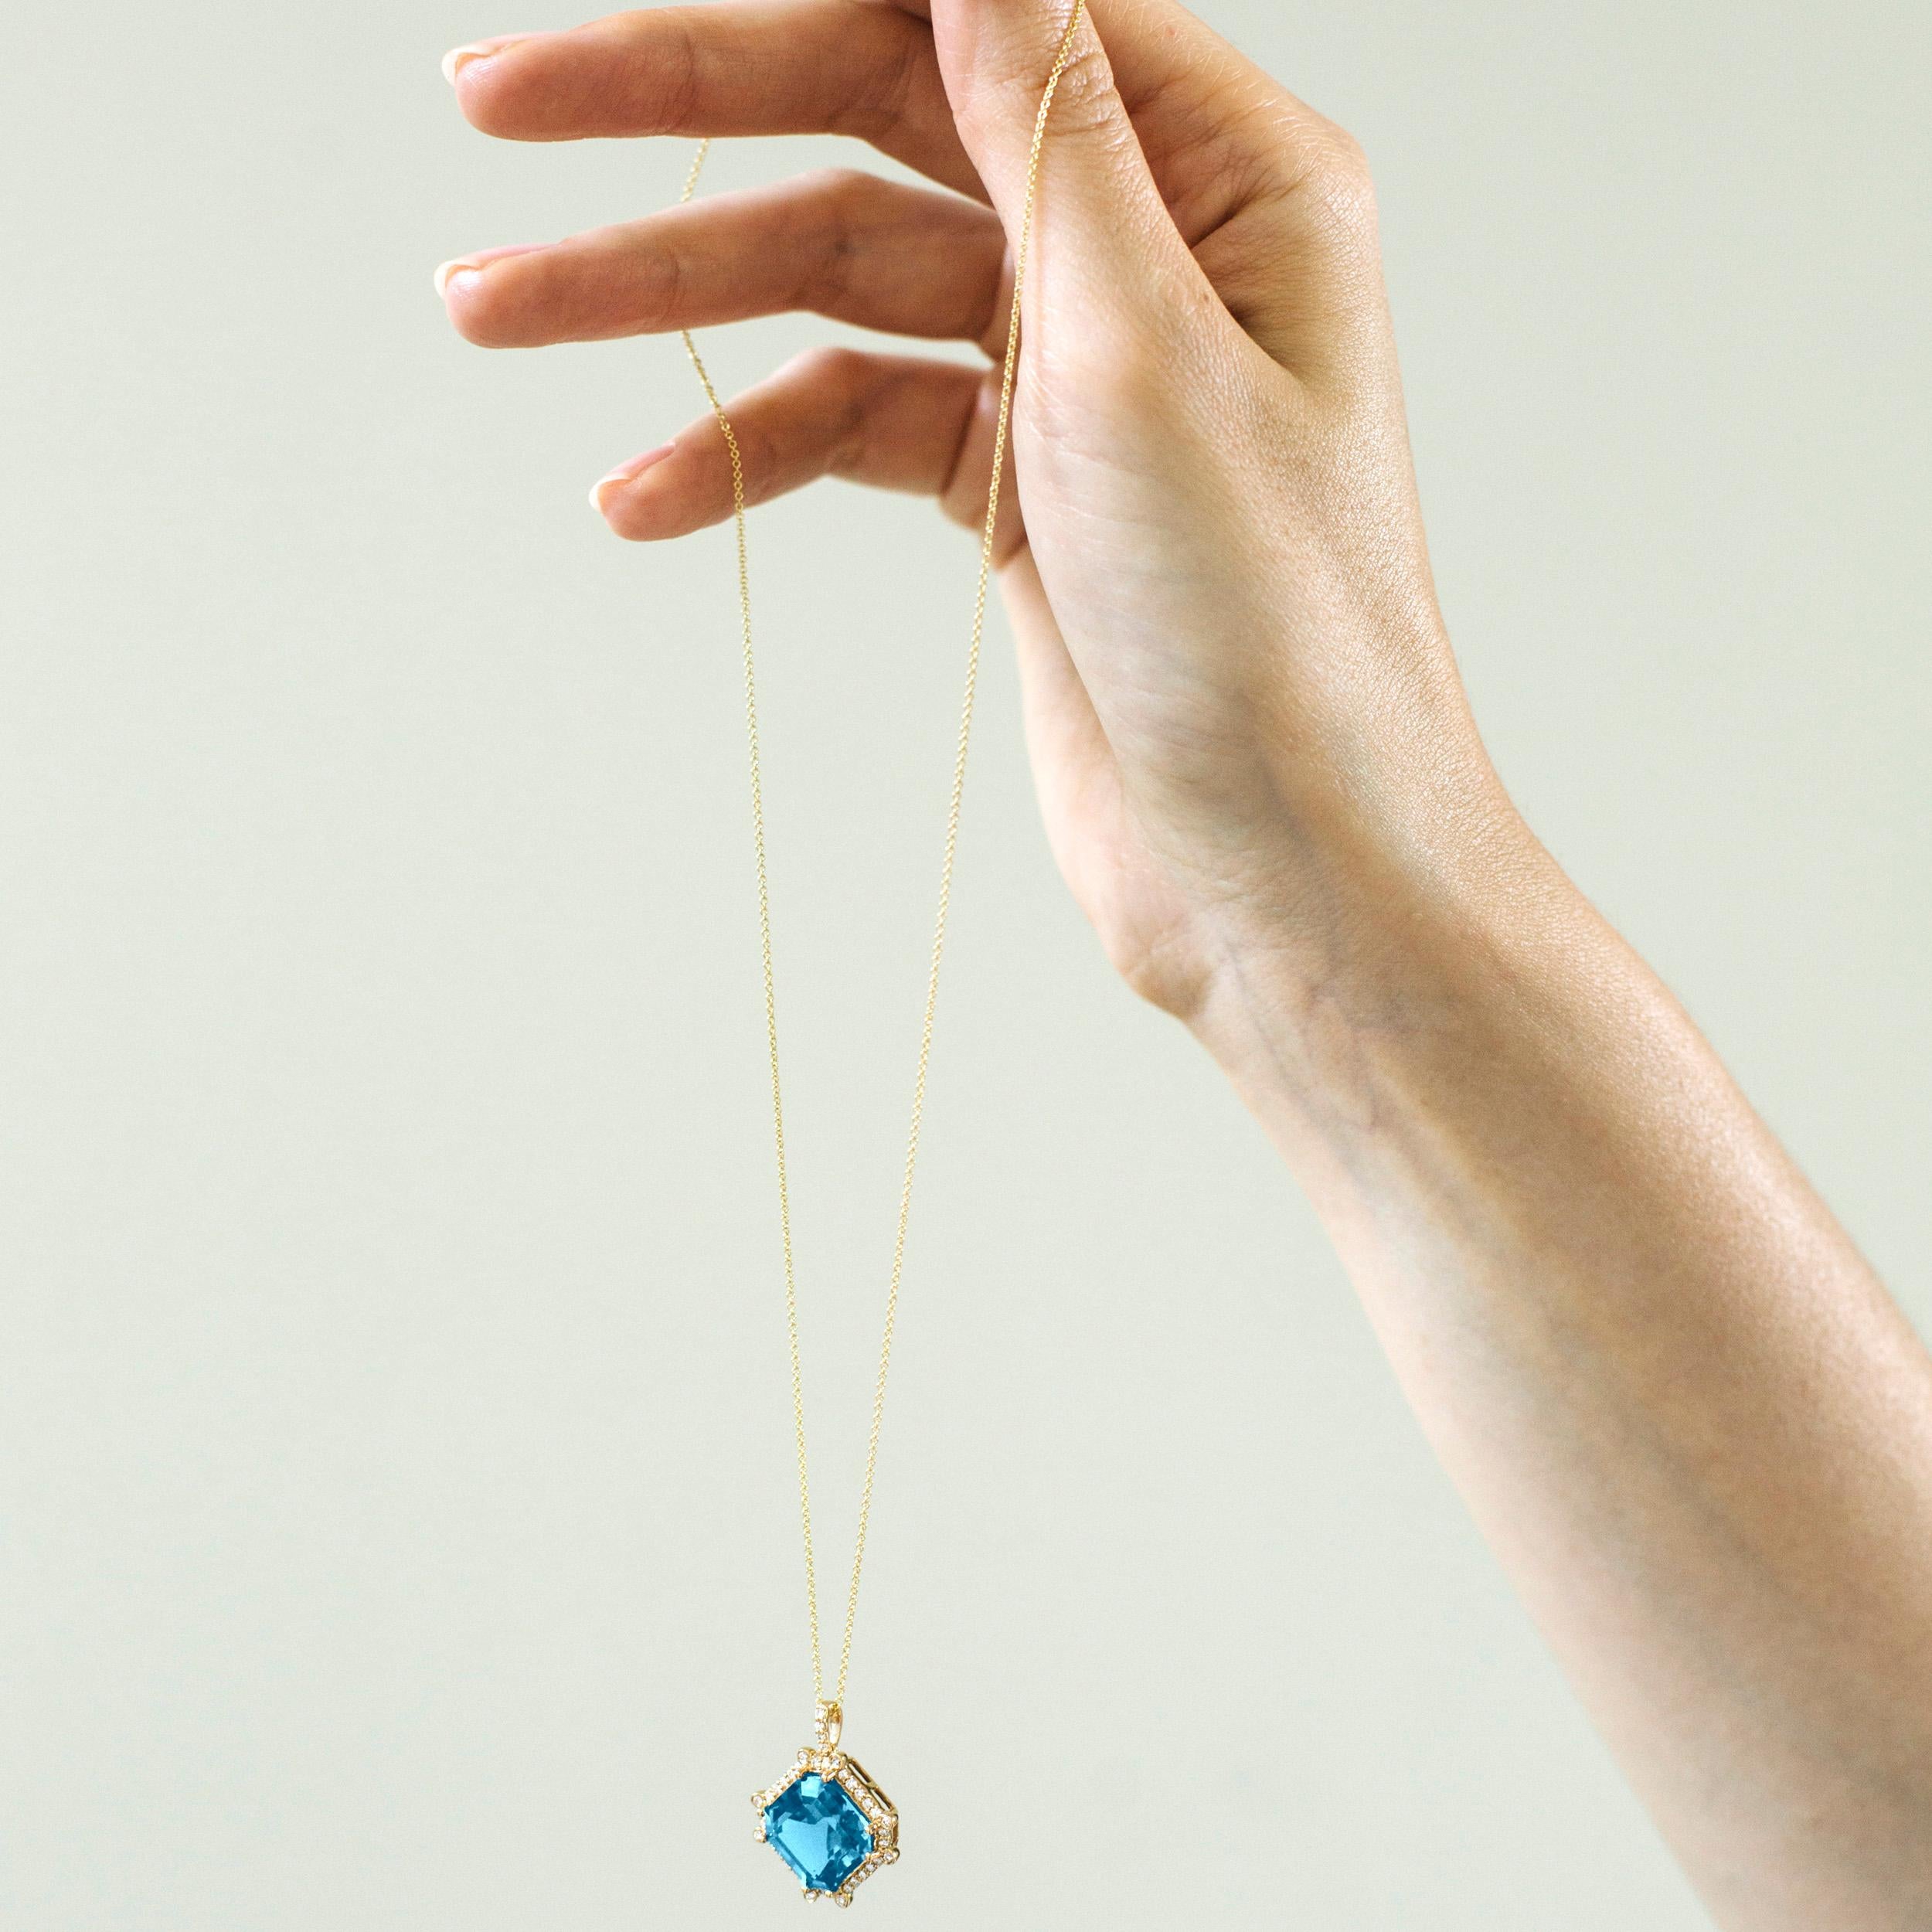 Blue Topaz & Diamond Octagon Pendant in 18K Yellow Gold on an 18'' Chain from 'Gossip' Collection

Stone Size: 12 x 12 mm 

Gemstone Approx Wt: Blue Topaz-  9.10 Carats

Diamonds: G-H / VS, Approx Wt: 0.30 Carats